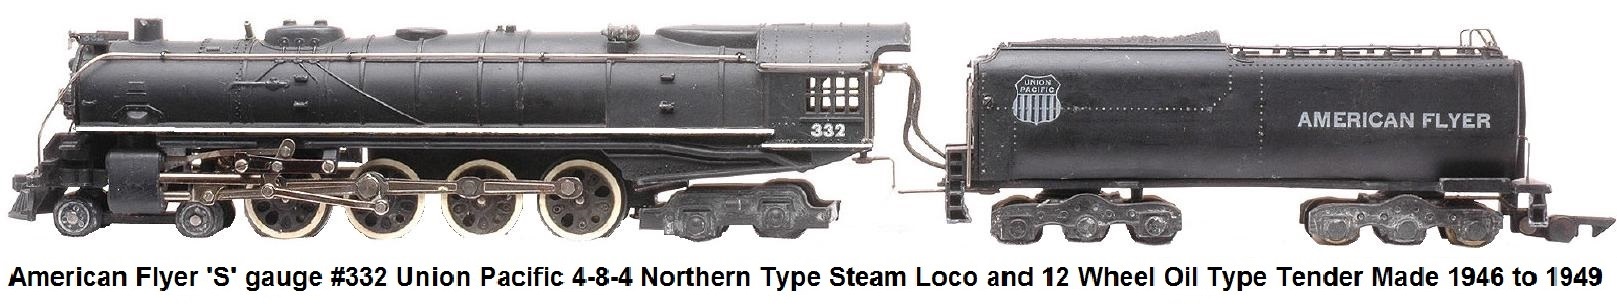 3 FT SMOKE UNIT NICHROME WIRE STEAM ENGINES for AMERICAN FLYER Trains 